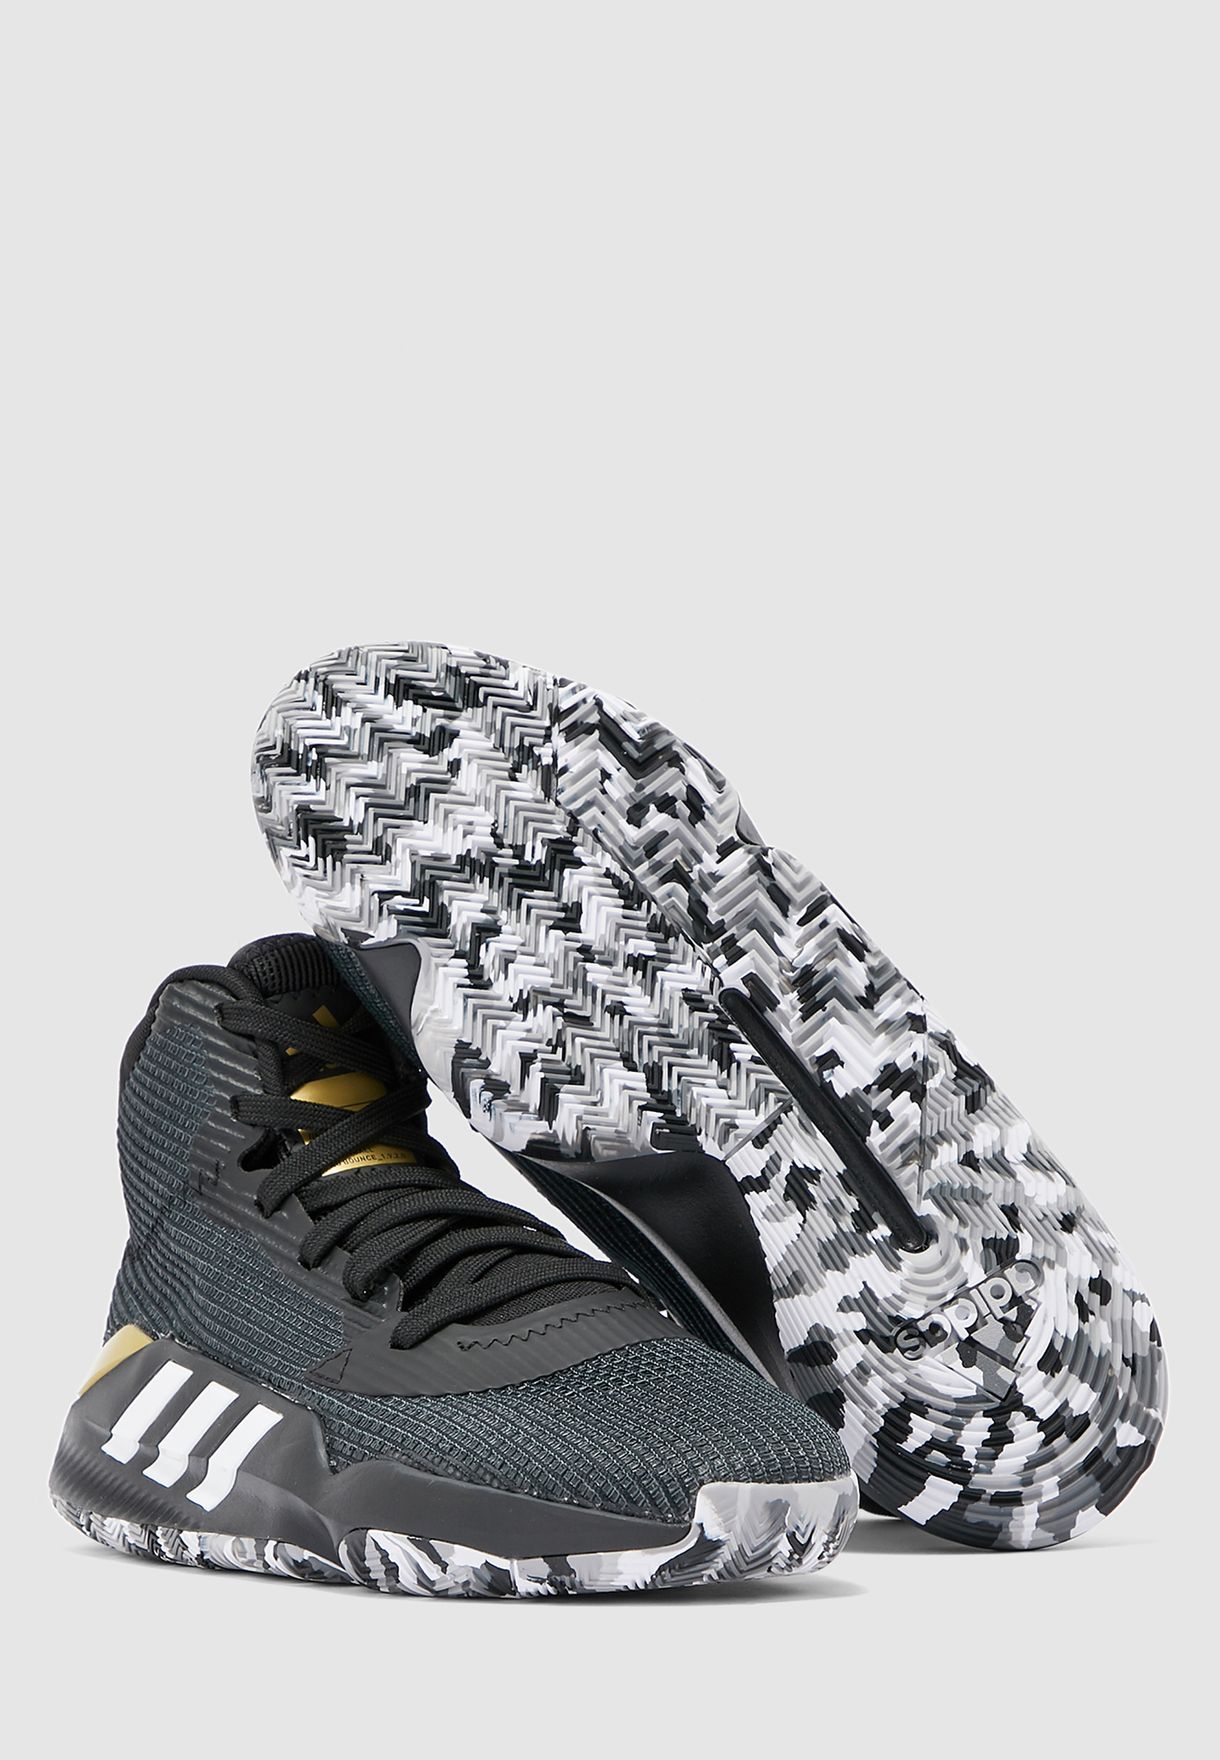 adidas pro bounce 2019 mid basketball shoes